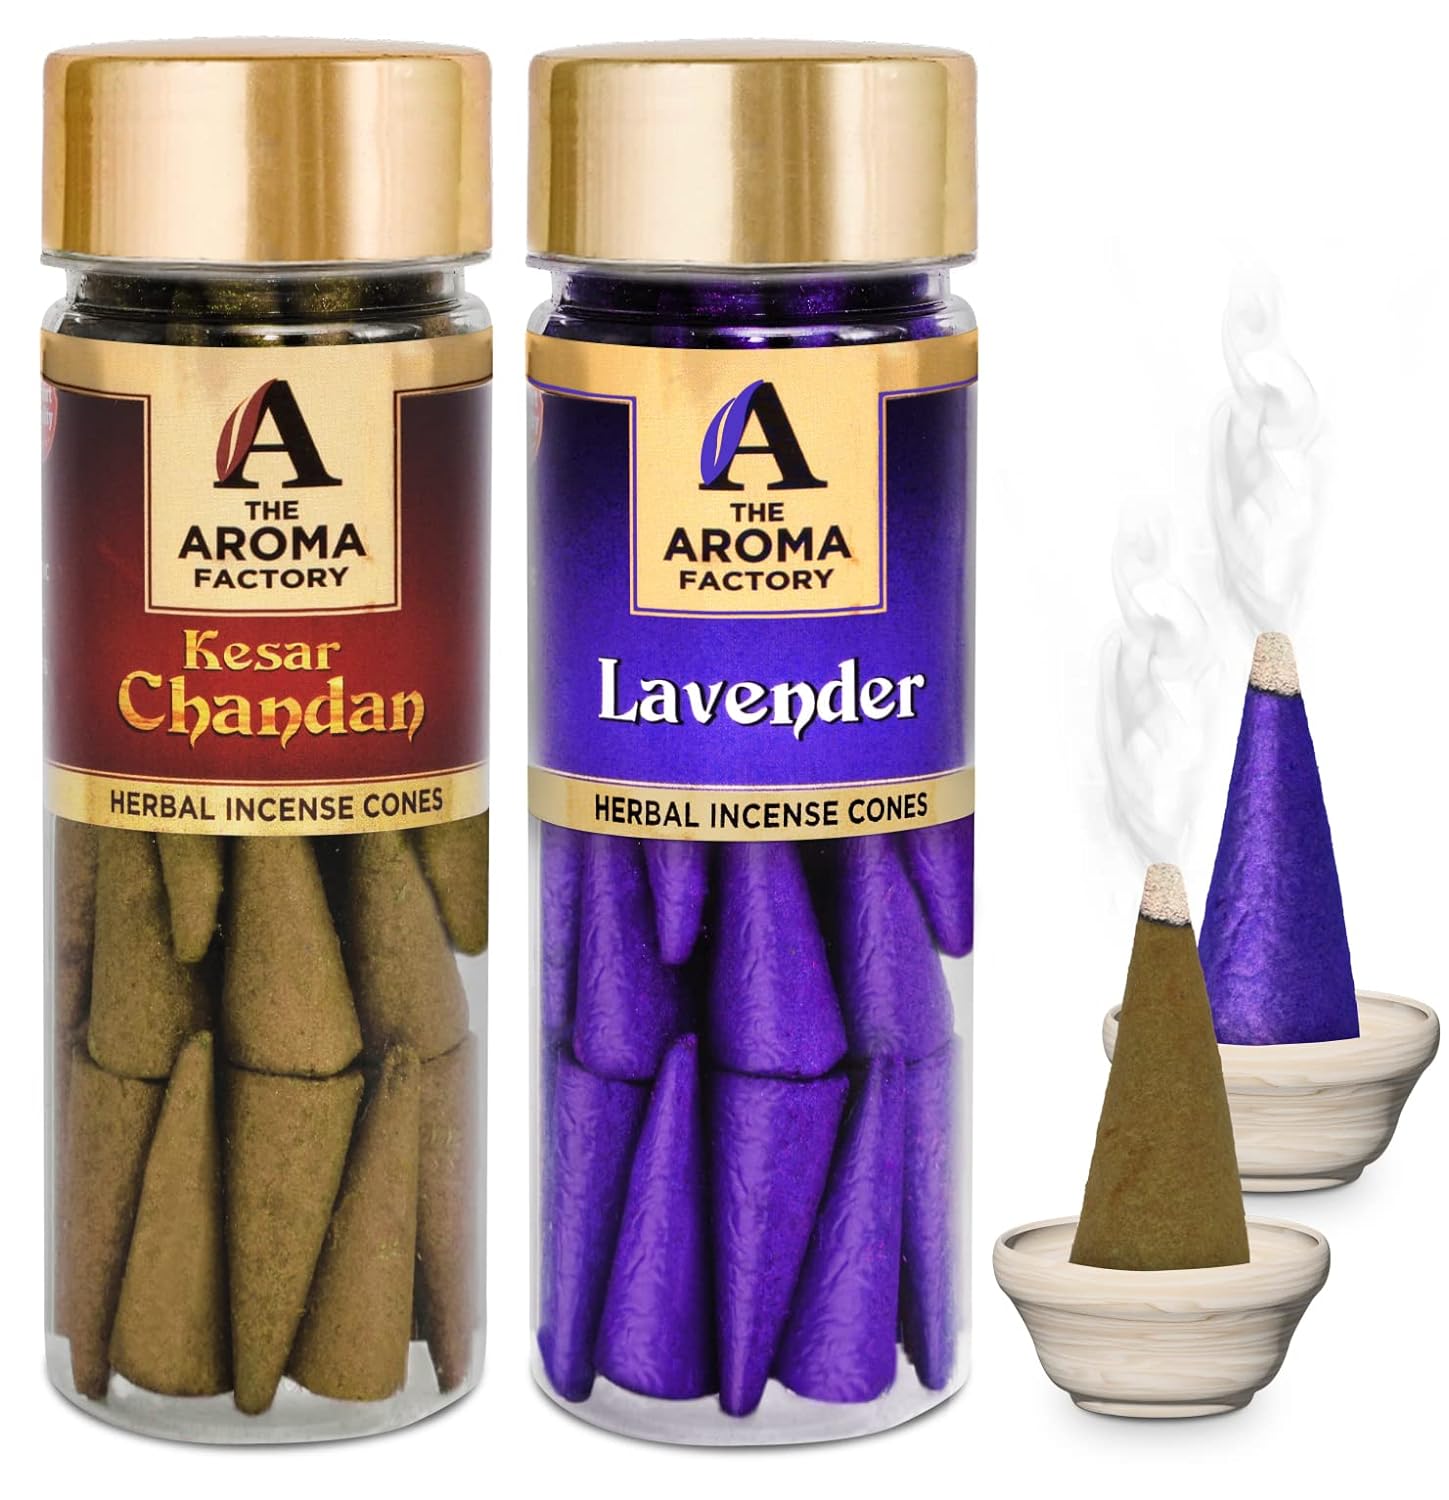 The Aroma Factory Incense Dhoop Cone for Pooja, Kesar Chandan & Lavender (100% Herbal & 0% Charcoal) 2 Bottles x 30 Cones